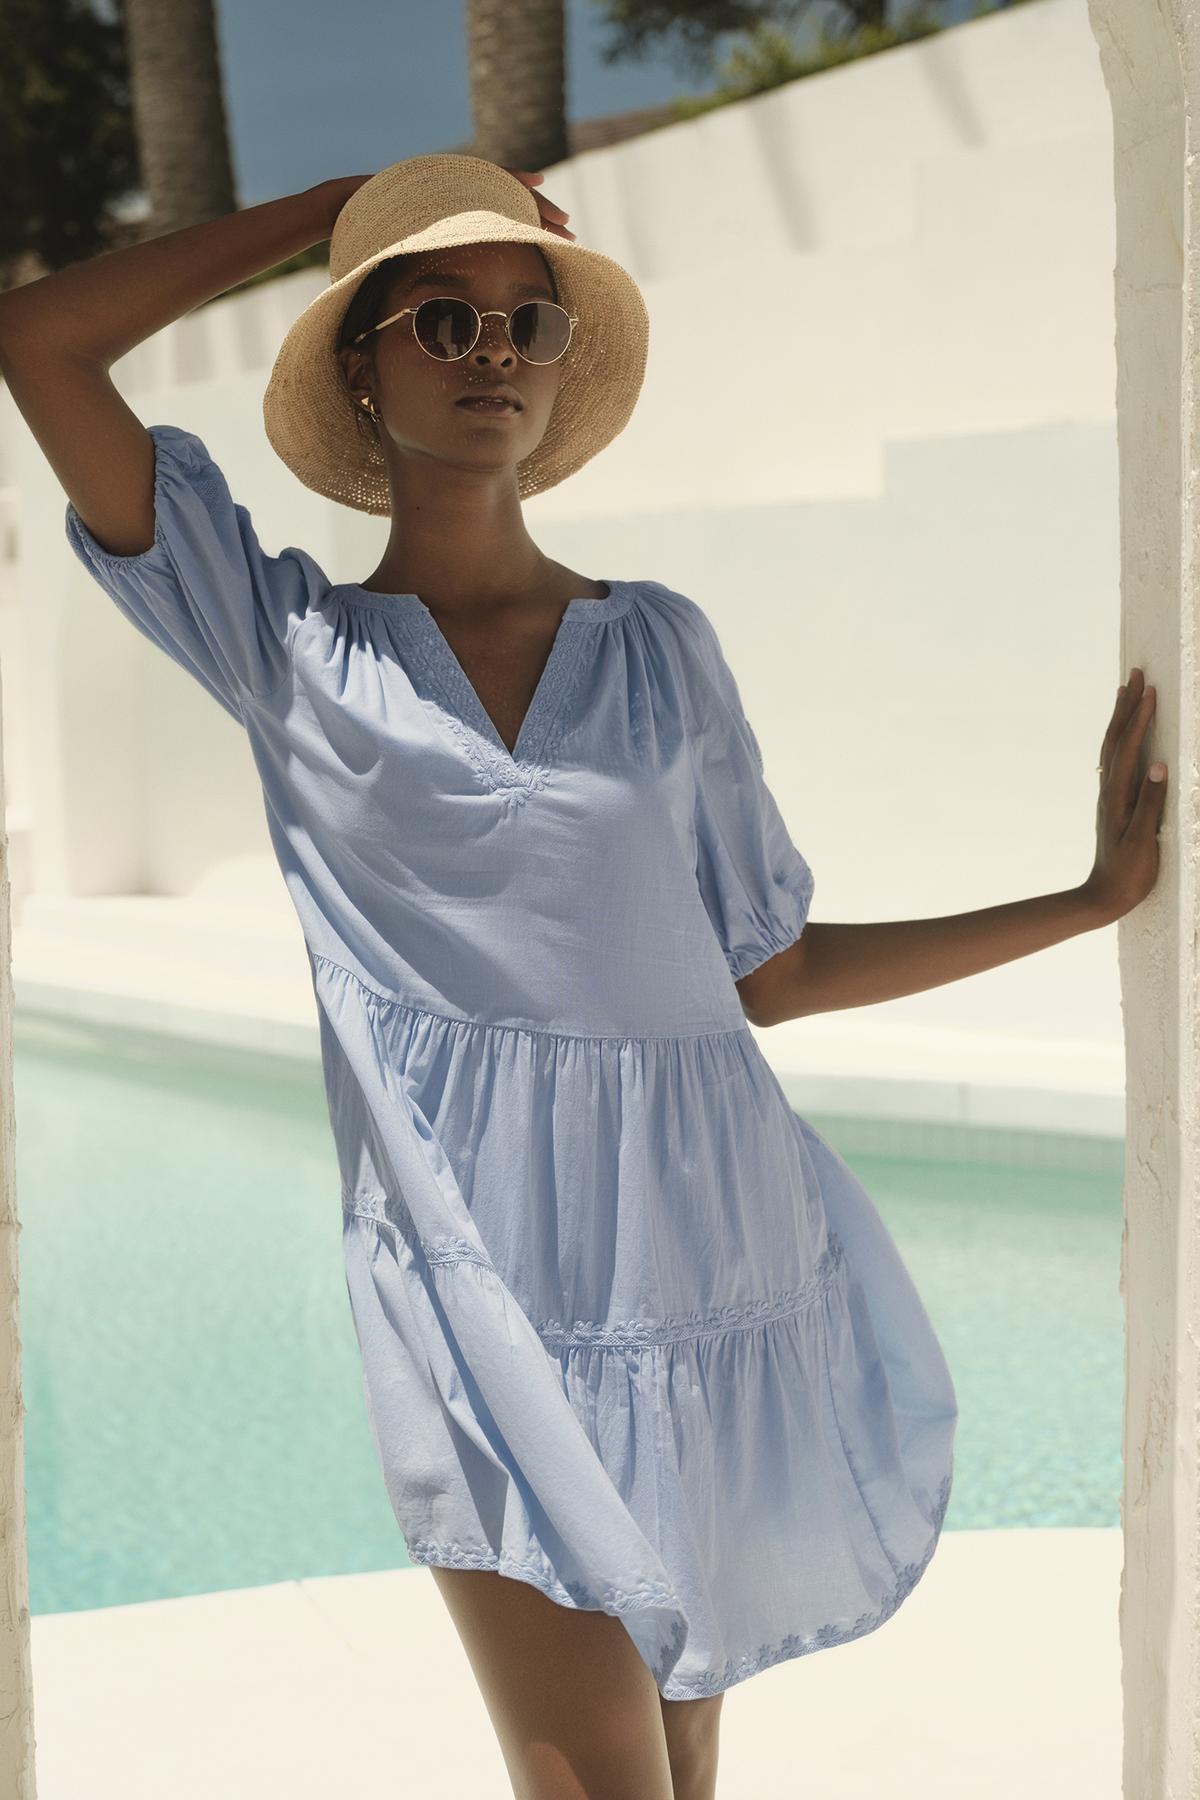 A woman in a CHRISSY EMBROIDERED BOHO DRESS by Velvet by Graham & Spencer and straw hat posing by a pool, with a white wall and palm trees in the background.-36161197670593